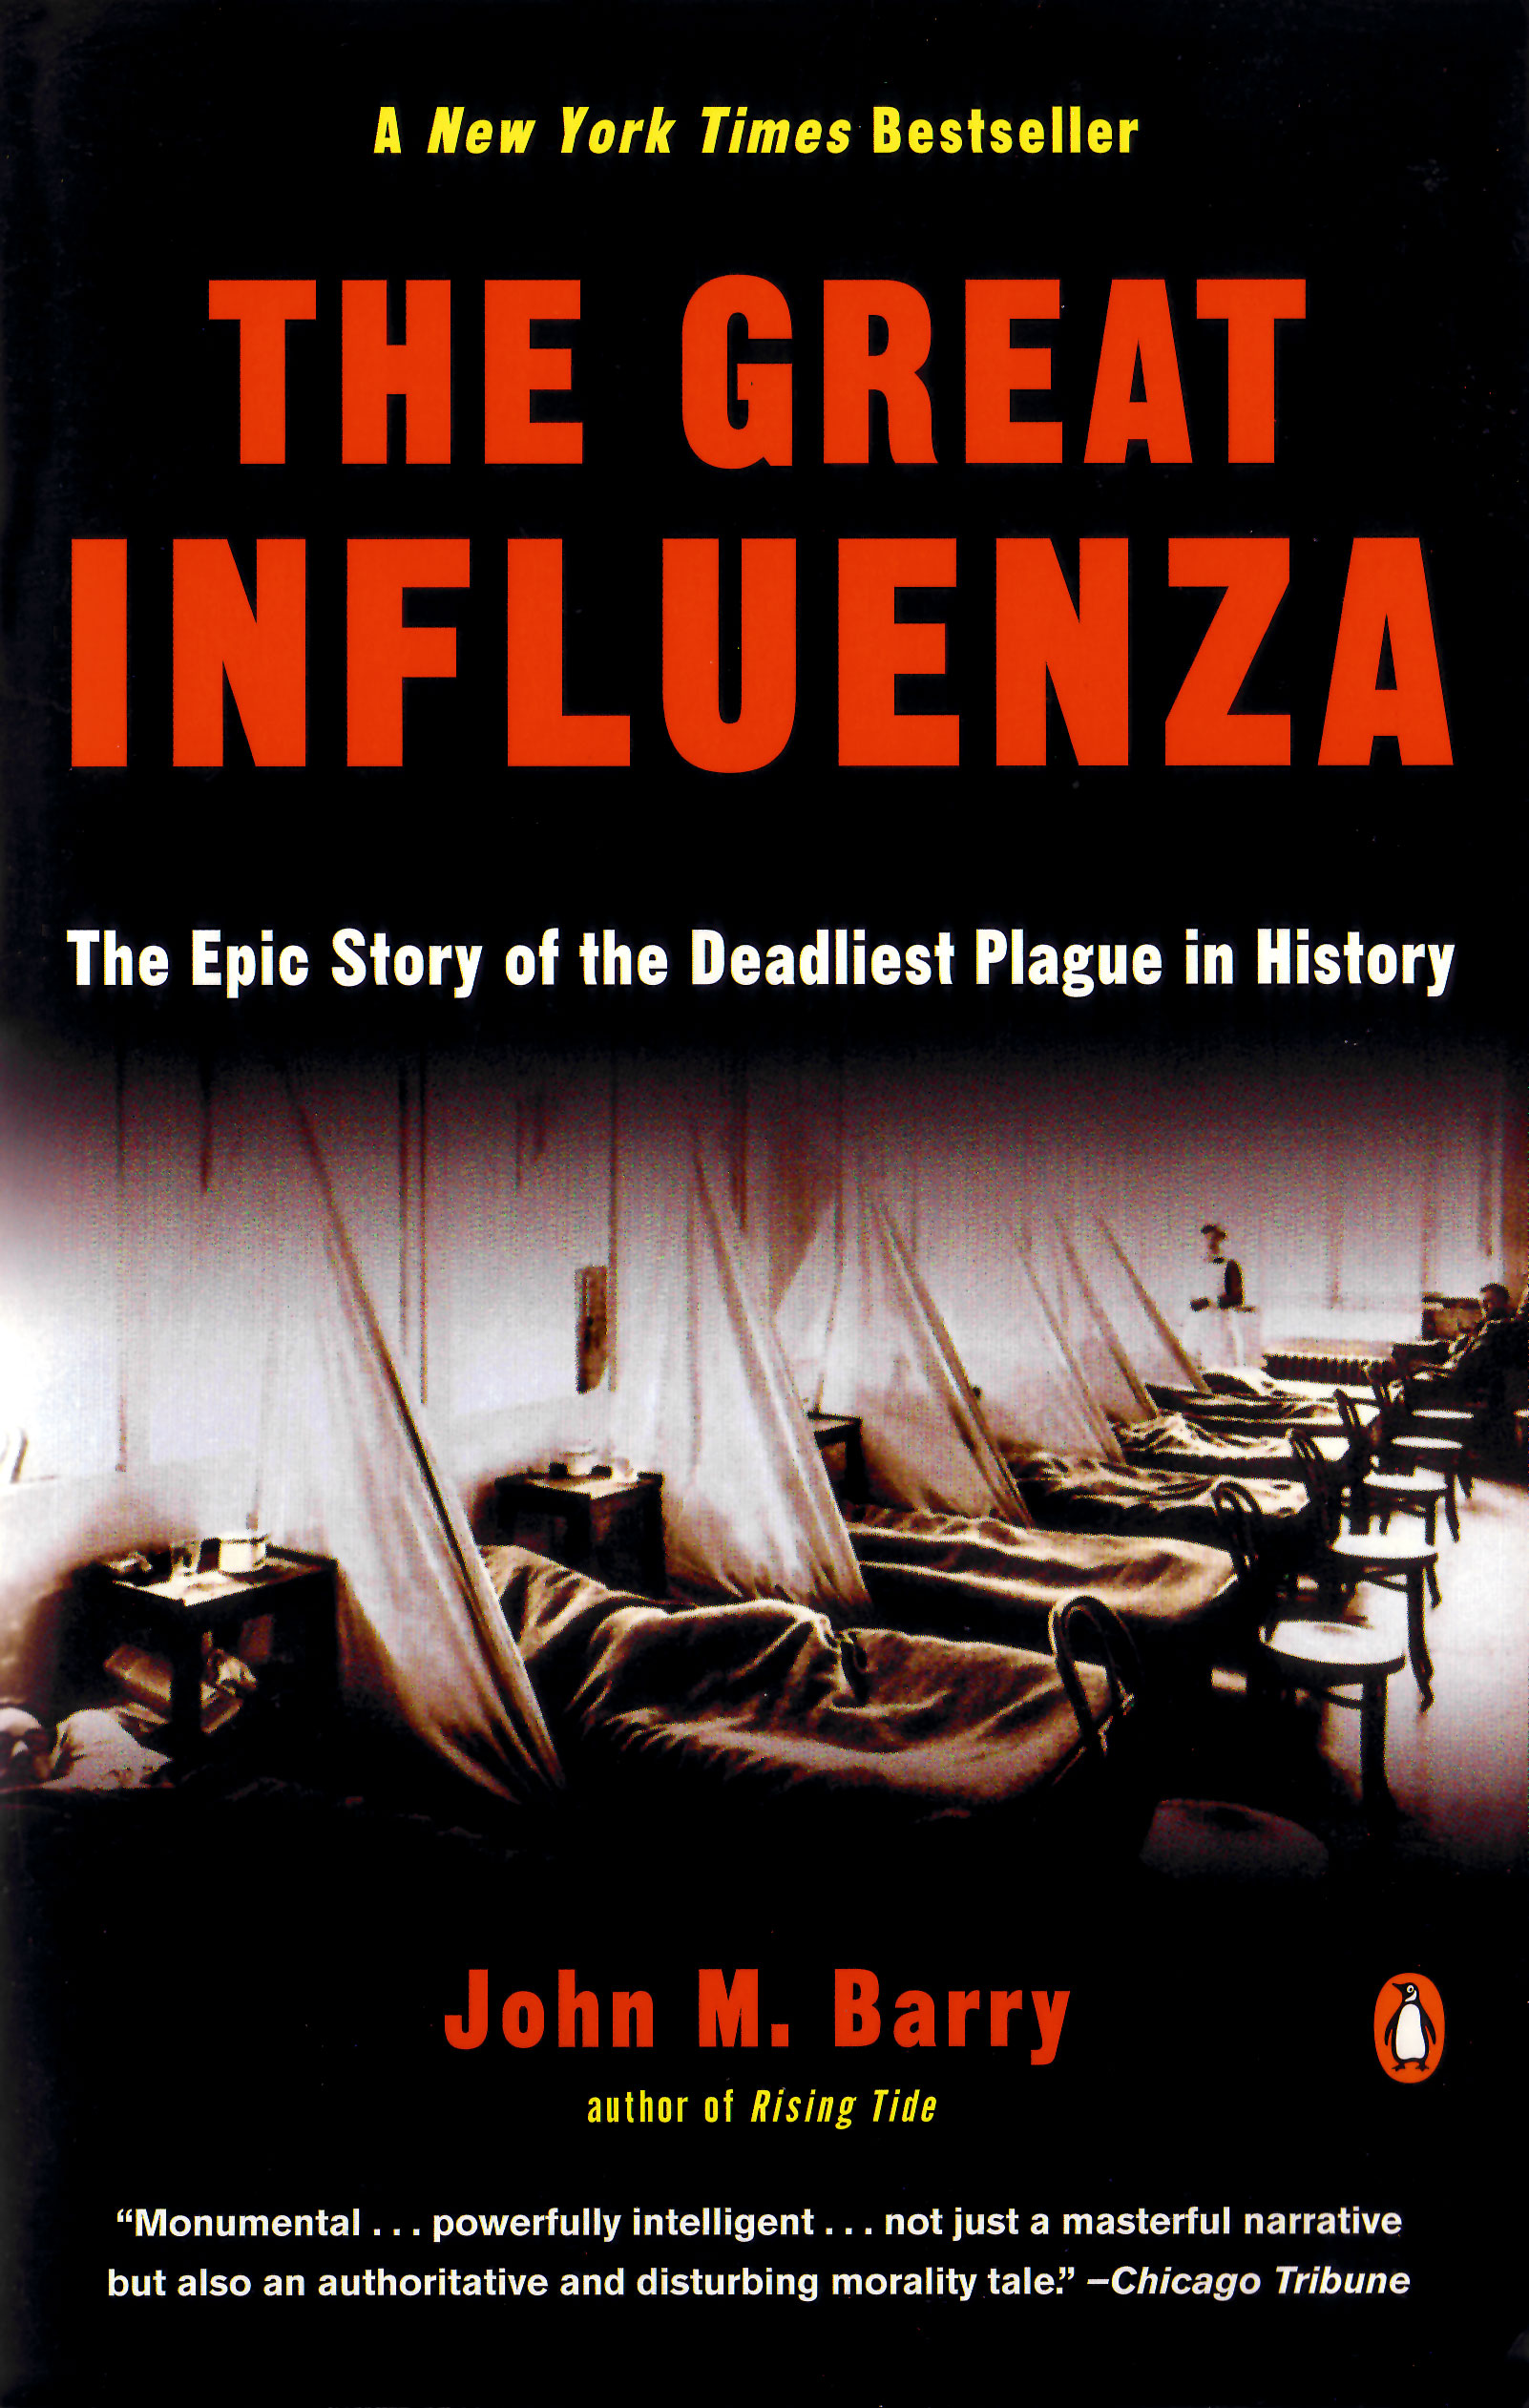 The 1918 Influenza Pandemic